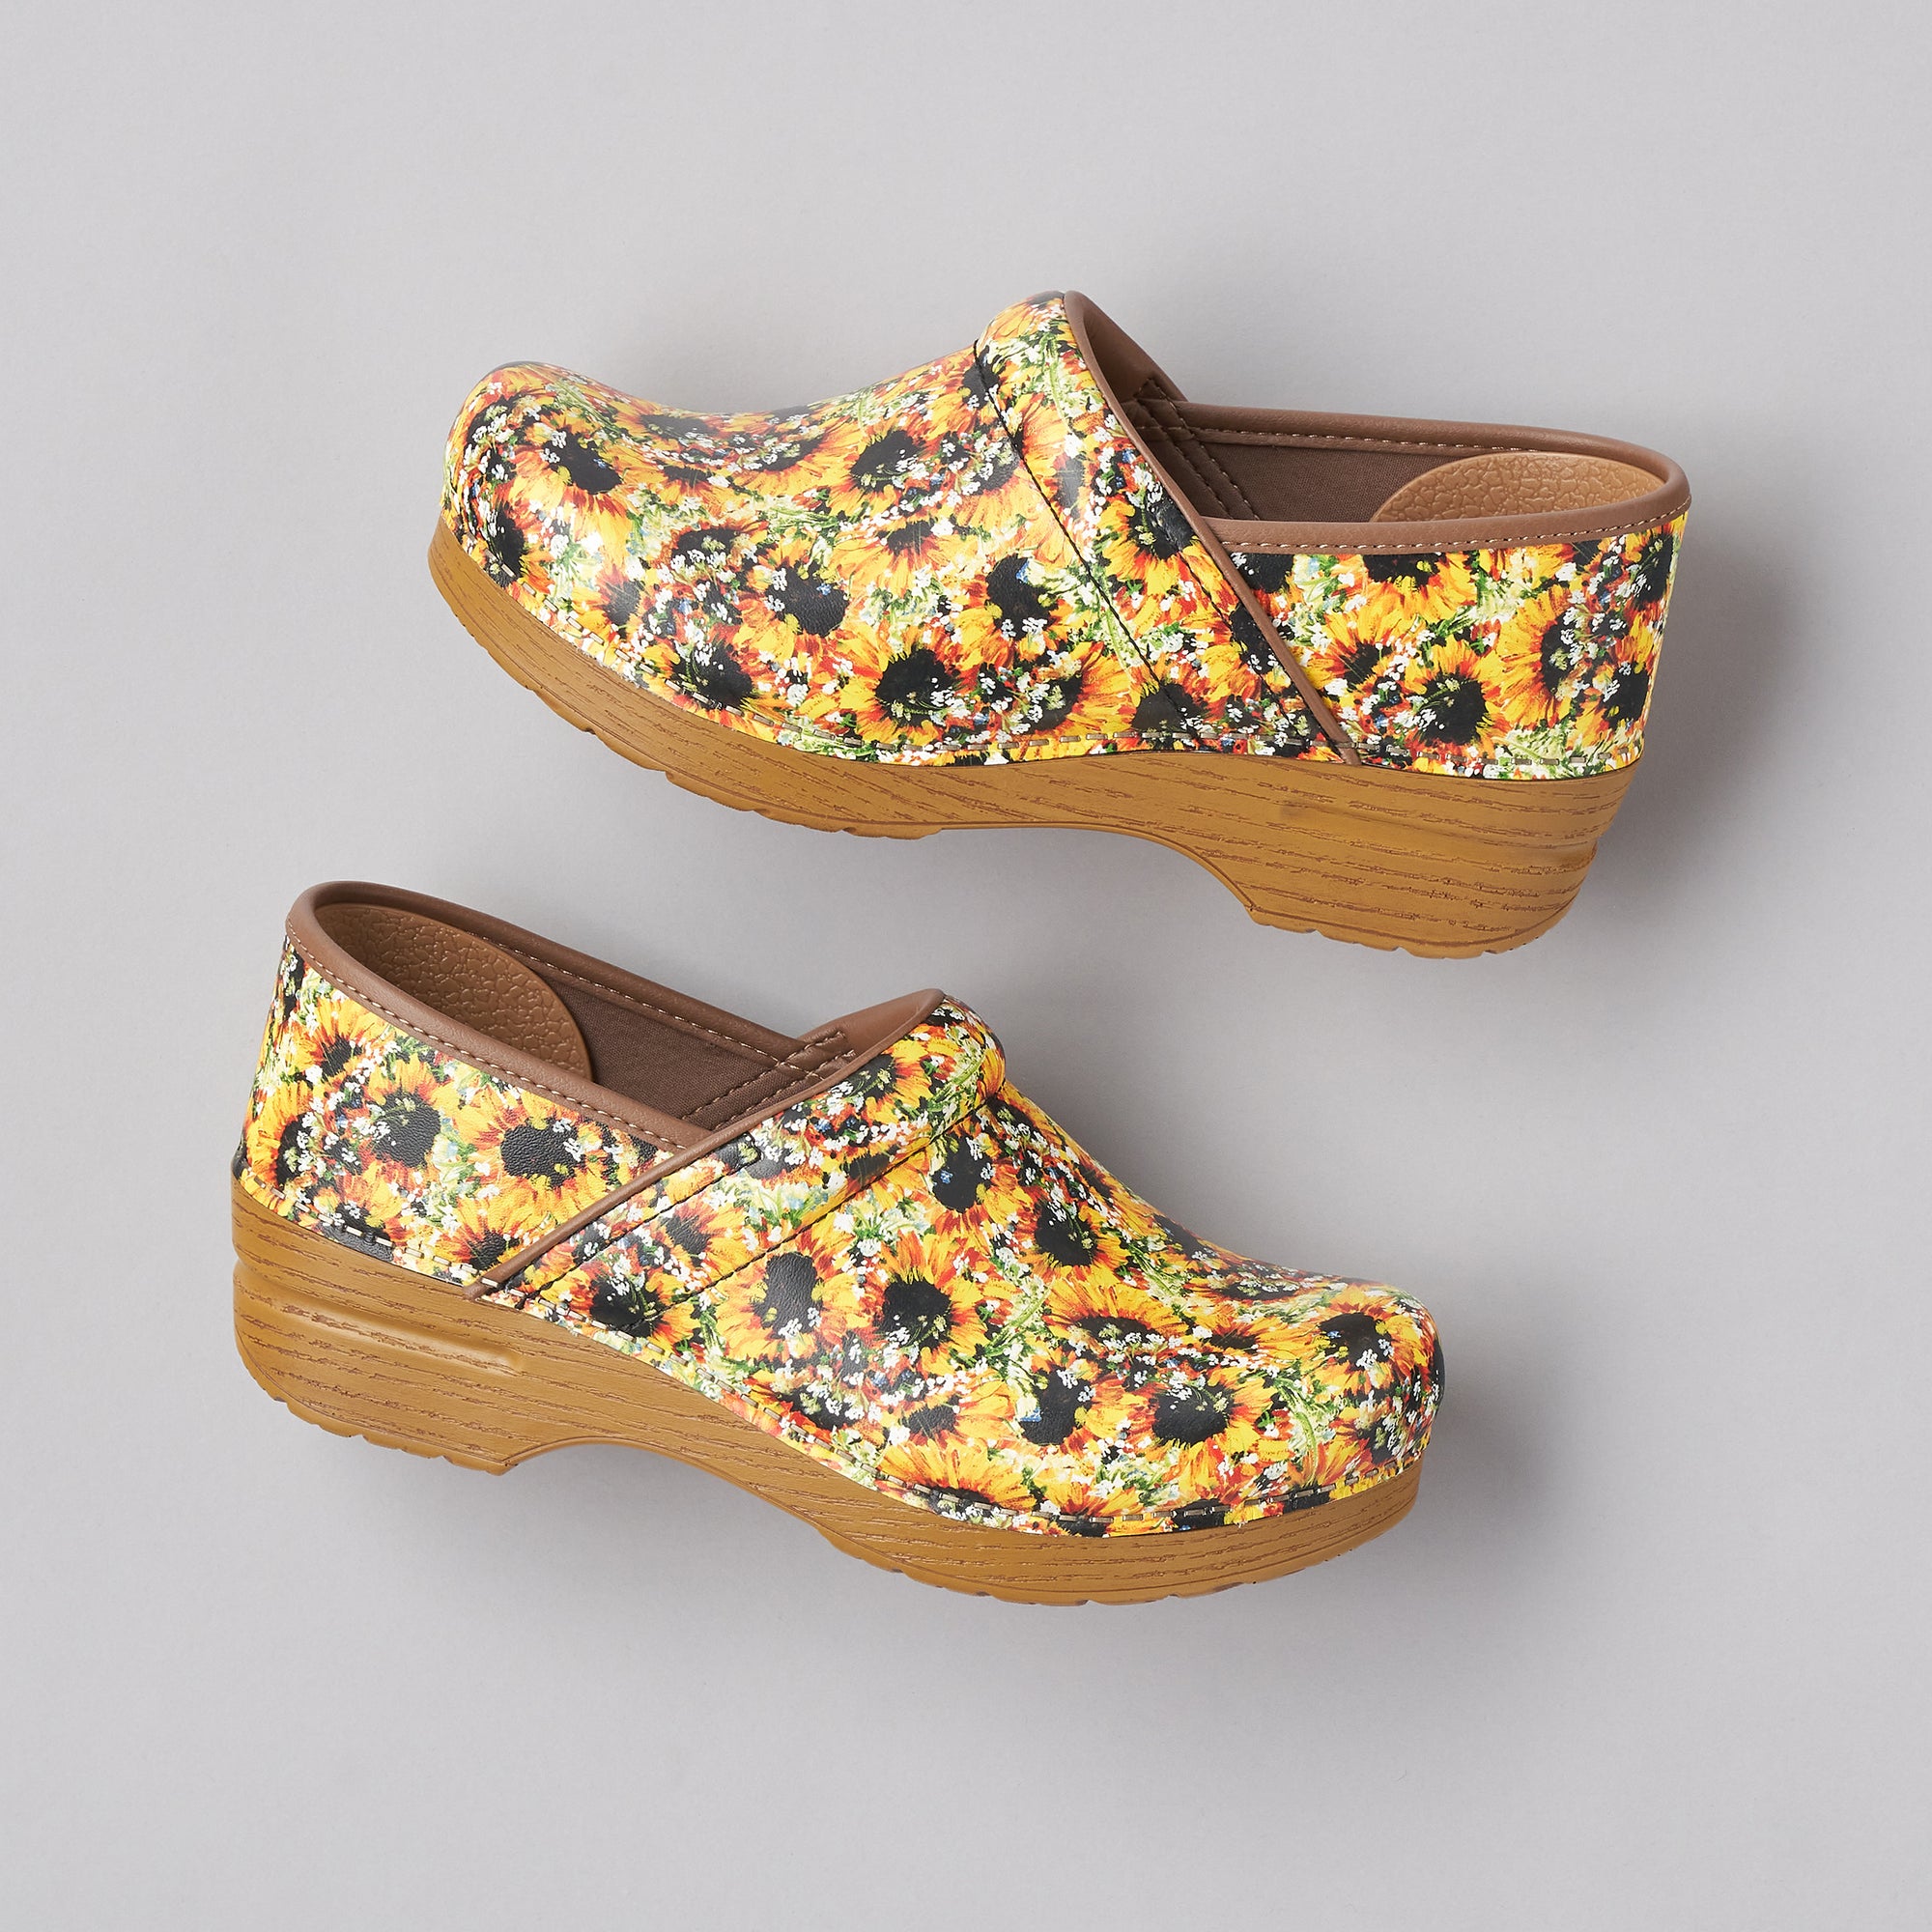 Bright sunflower clogs bring a vibrant print to faux wood soles.